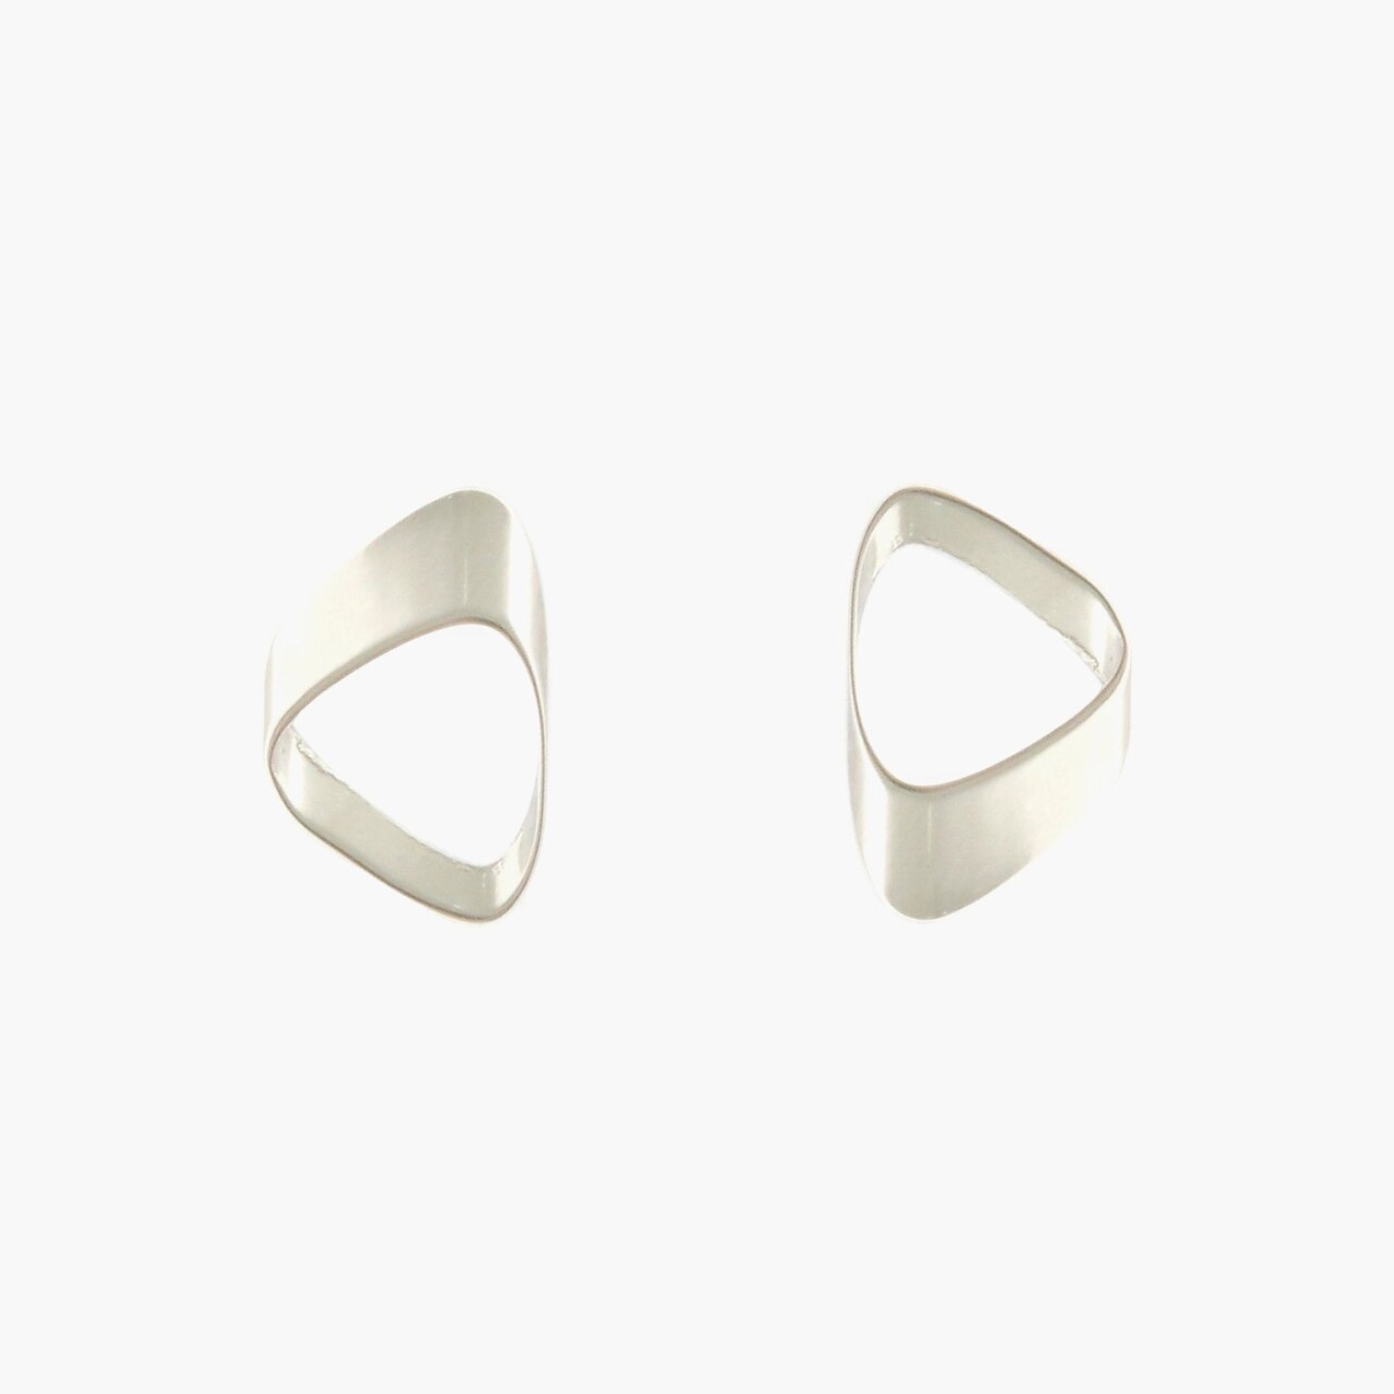 Flattened Curved Triangle Studs - Matte Silver